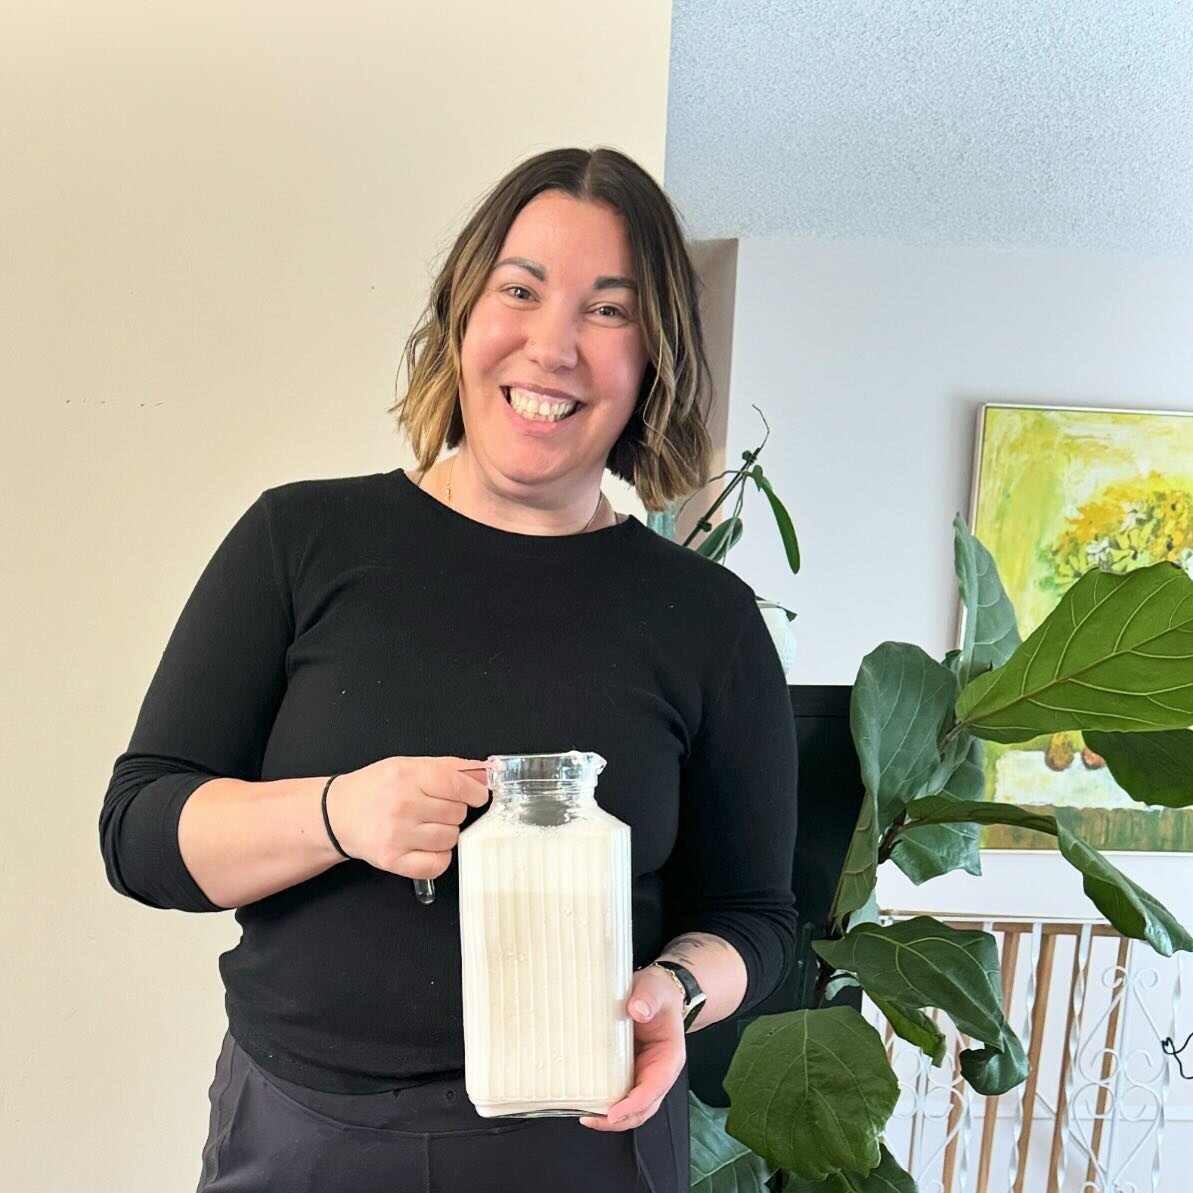 Got milk? Nah, me neither 😂😂😂

But I did make almond milk for the first time with my Vitamix 🤩

My new sessions is making chicken broth, I&rsquo;ve been clearing out clutter and shifting the energy in my home and now, almond milk lol. 

Side note